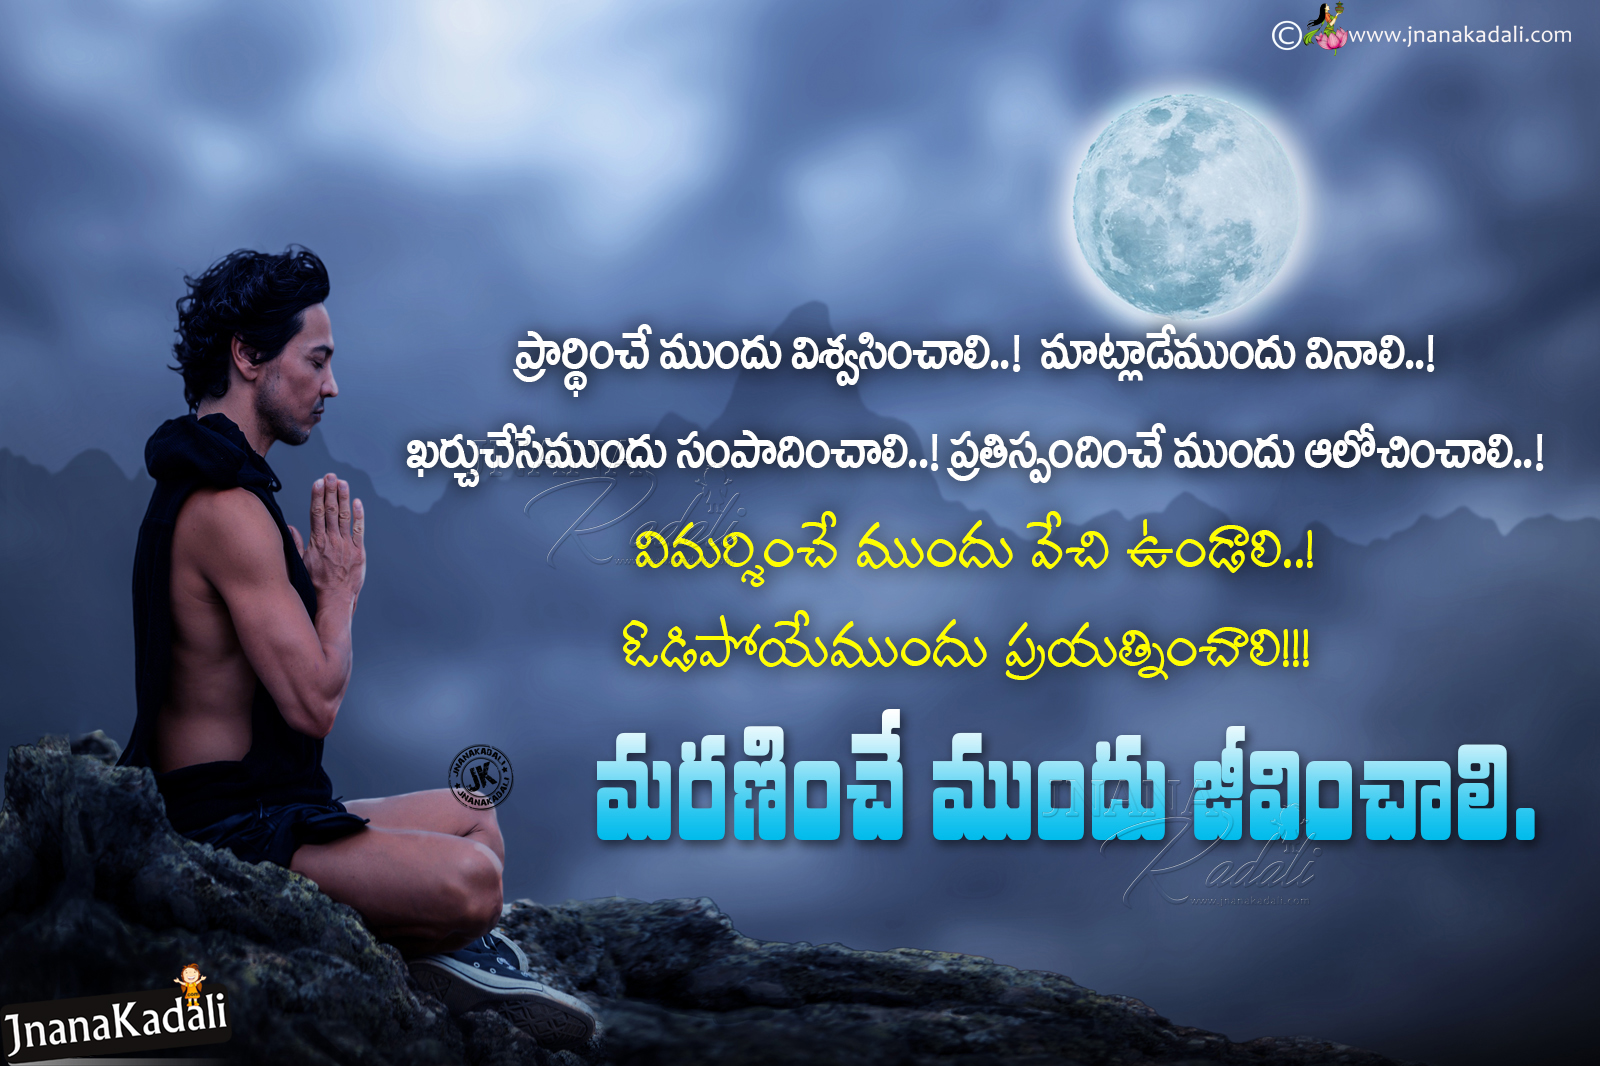 Be Happy and Live Successfully Quotes Messages in Telugu | JNANA ...